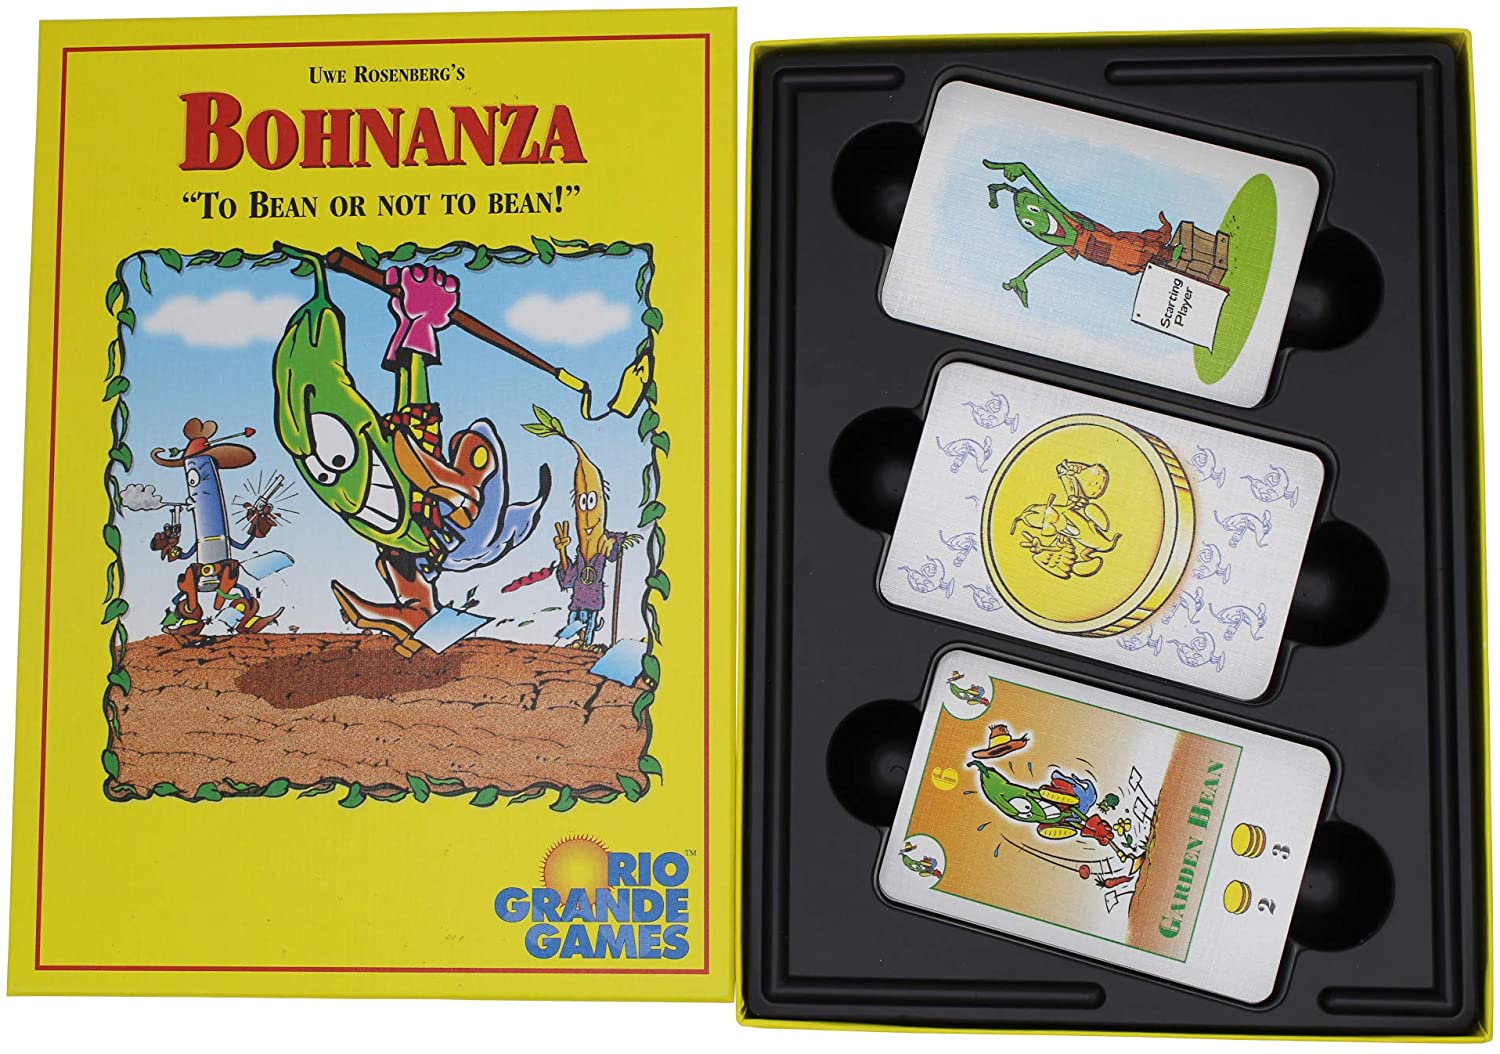 Find out about Bohnanza